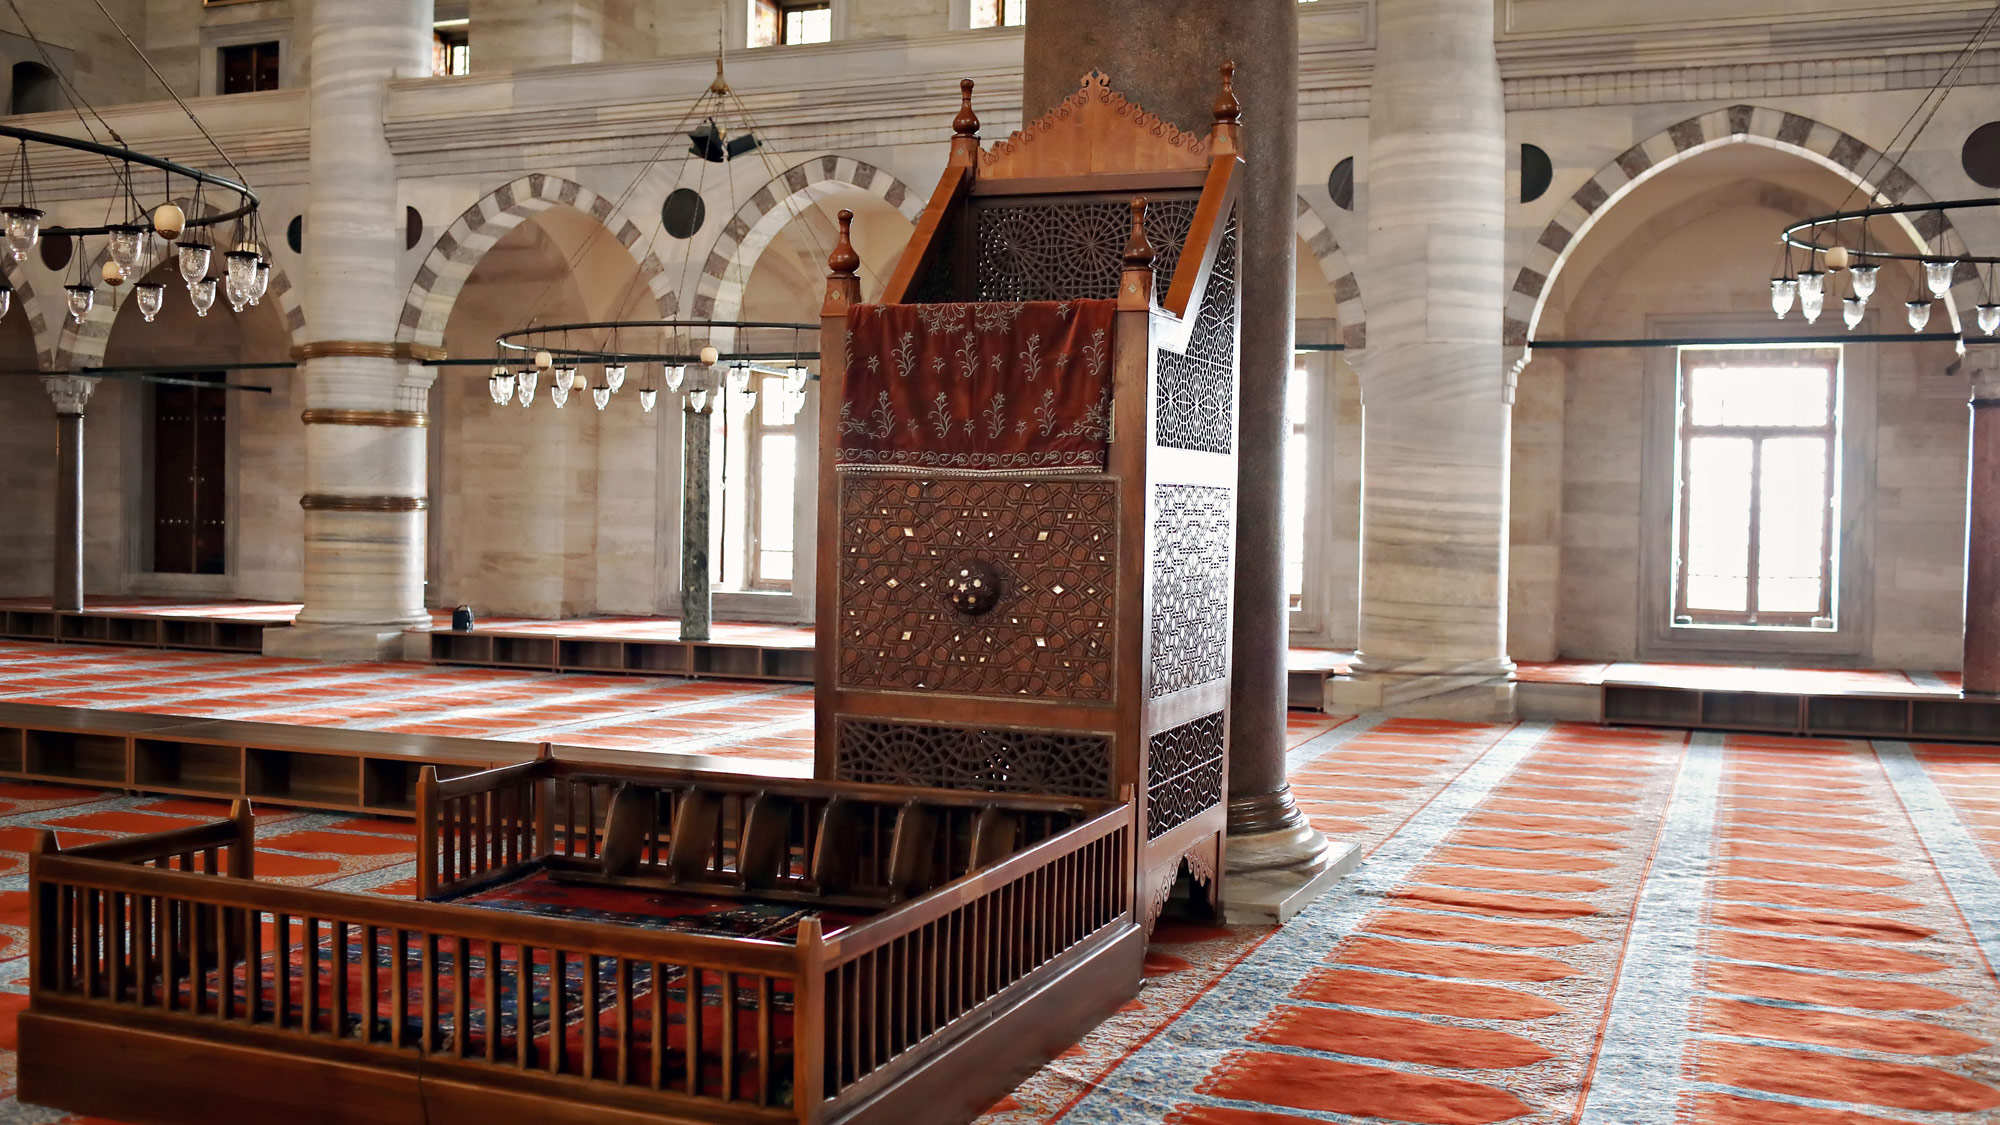 The kursi is a chair inside a mosque where Islamic schlors give lectures.